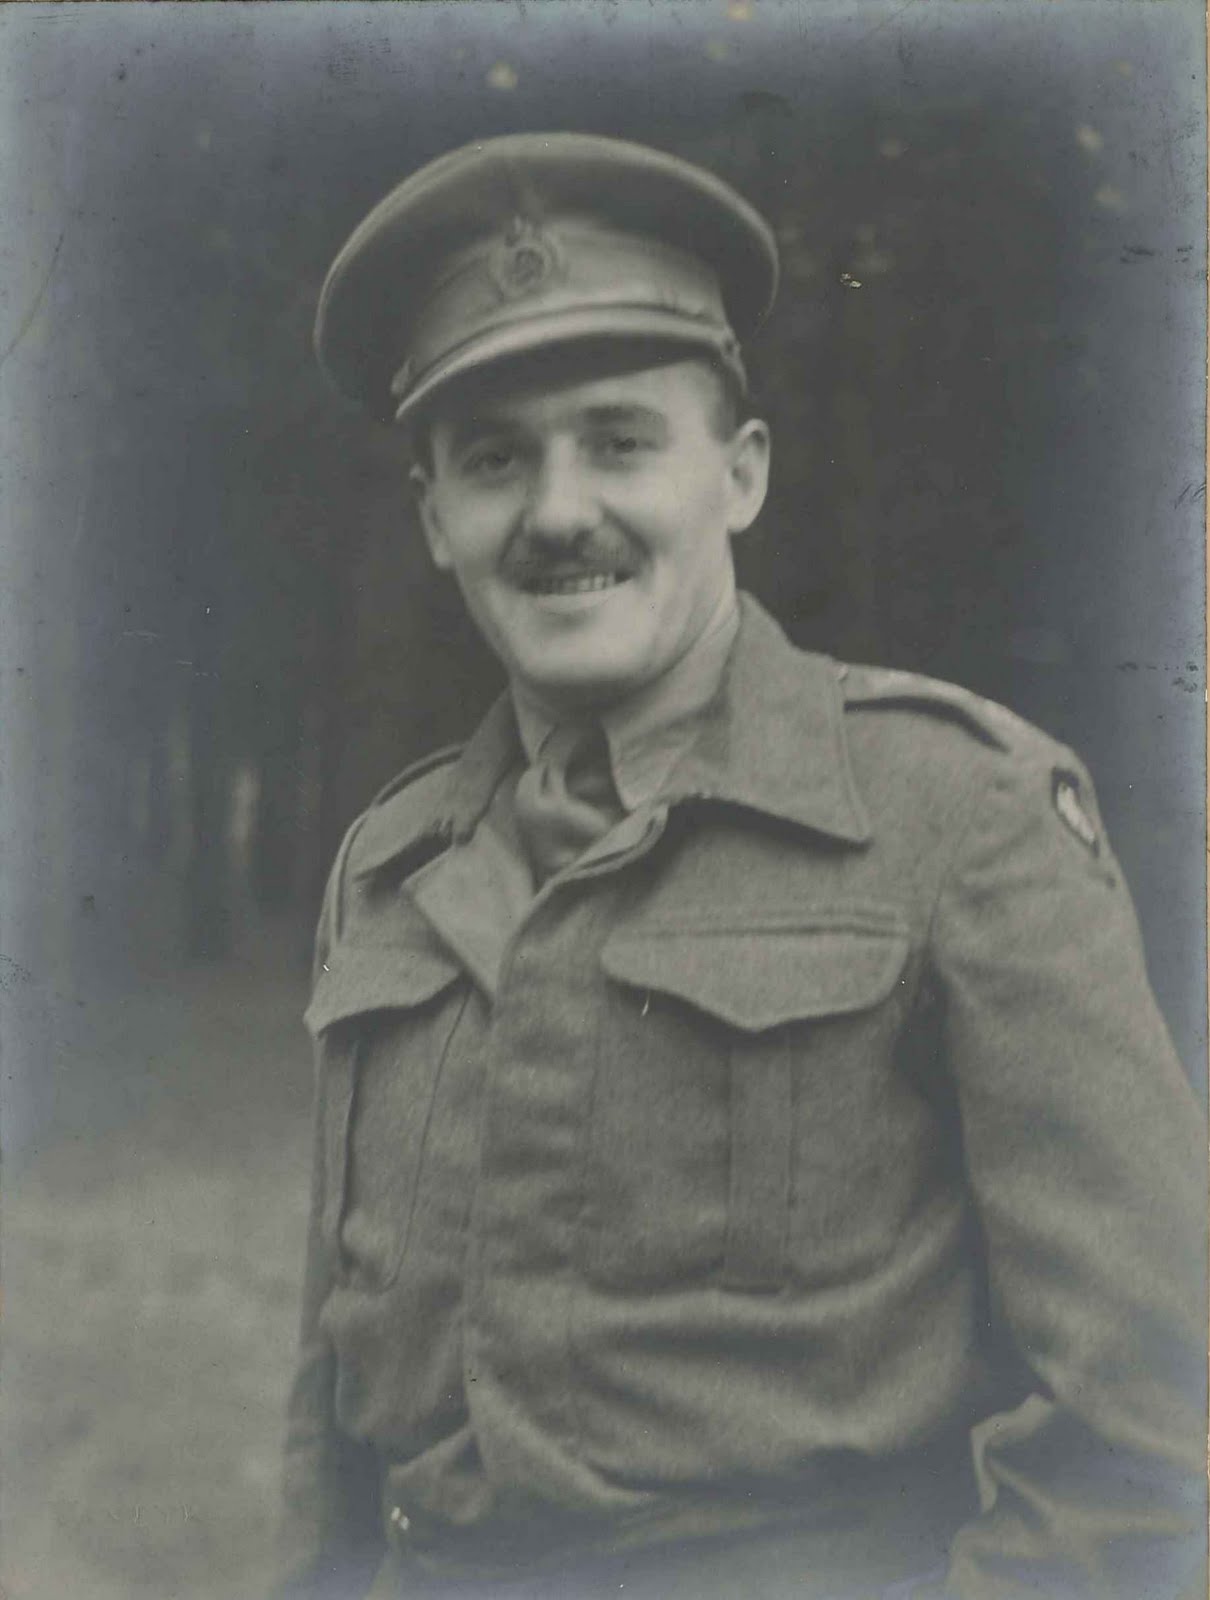 Robert Holmes as a Royal Engineers Captain attd. to  No.1 SS Bde